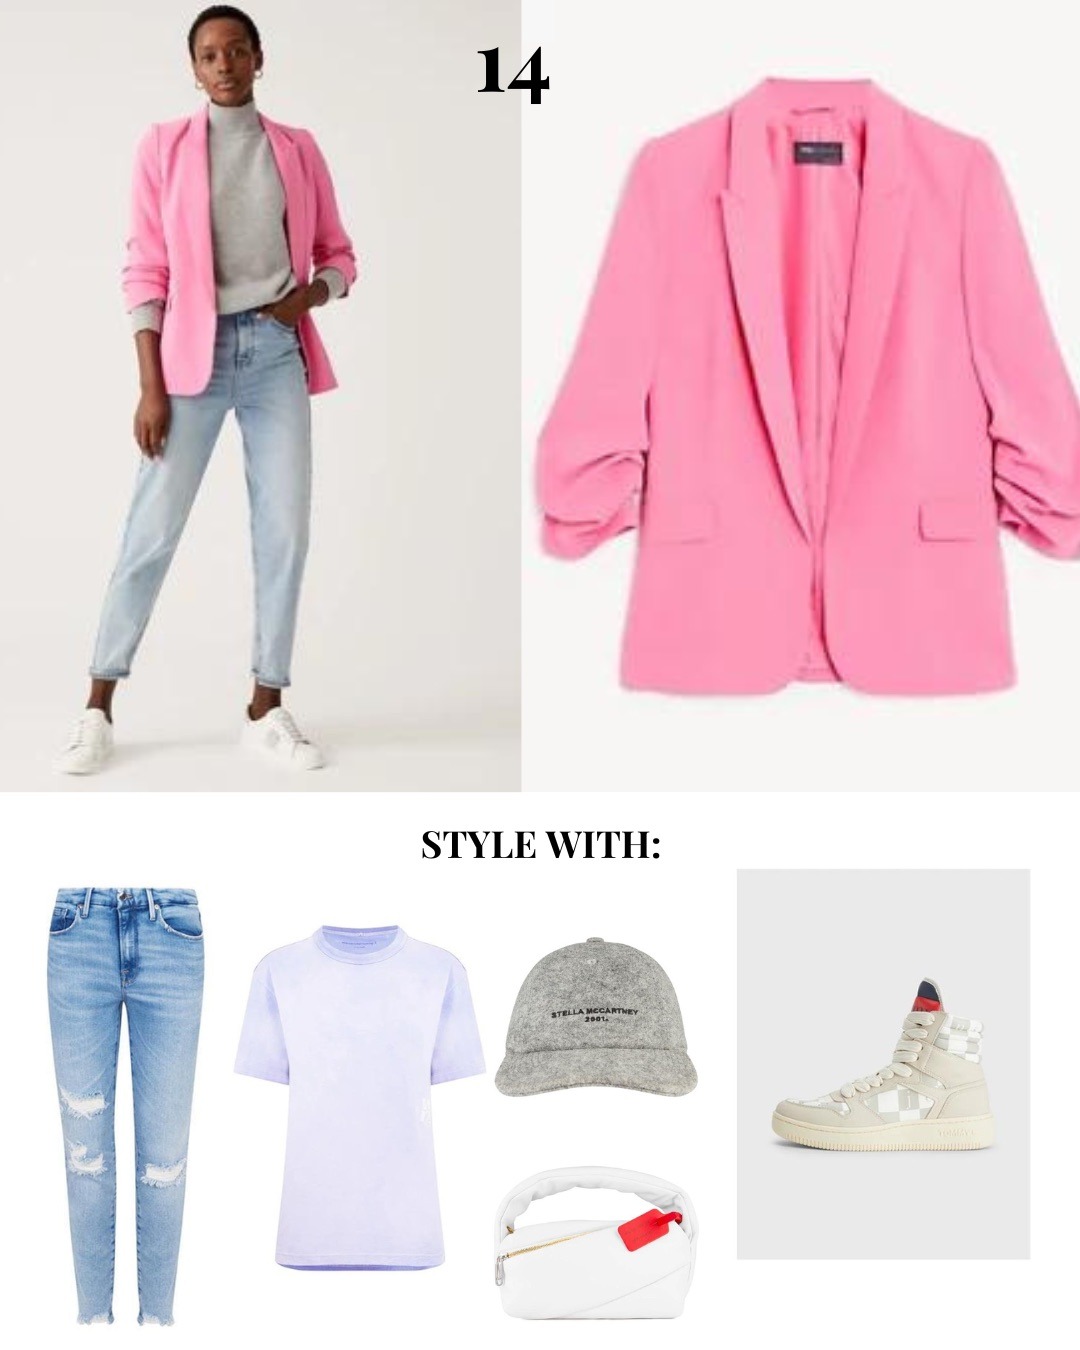 Pink blazer styled with jeans, top, cap, handbag and sneakers.